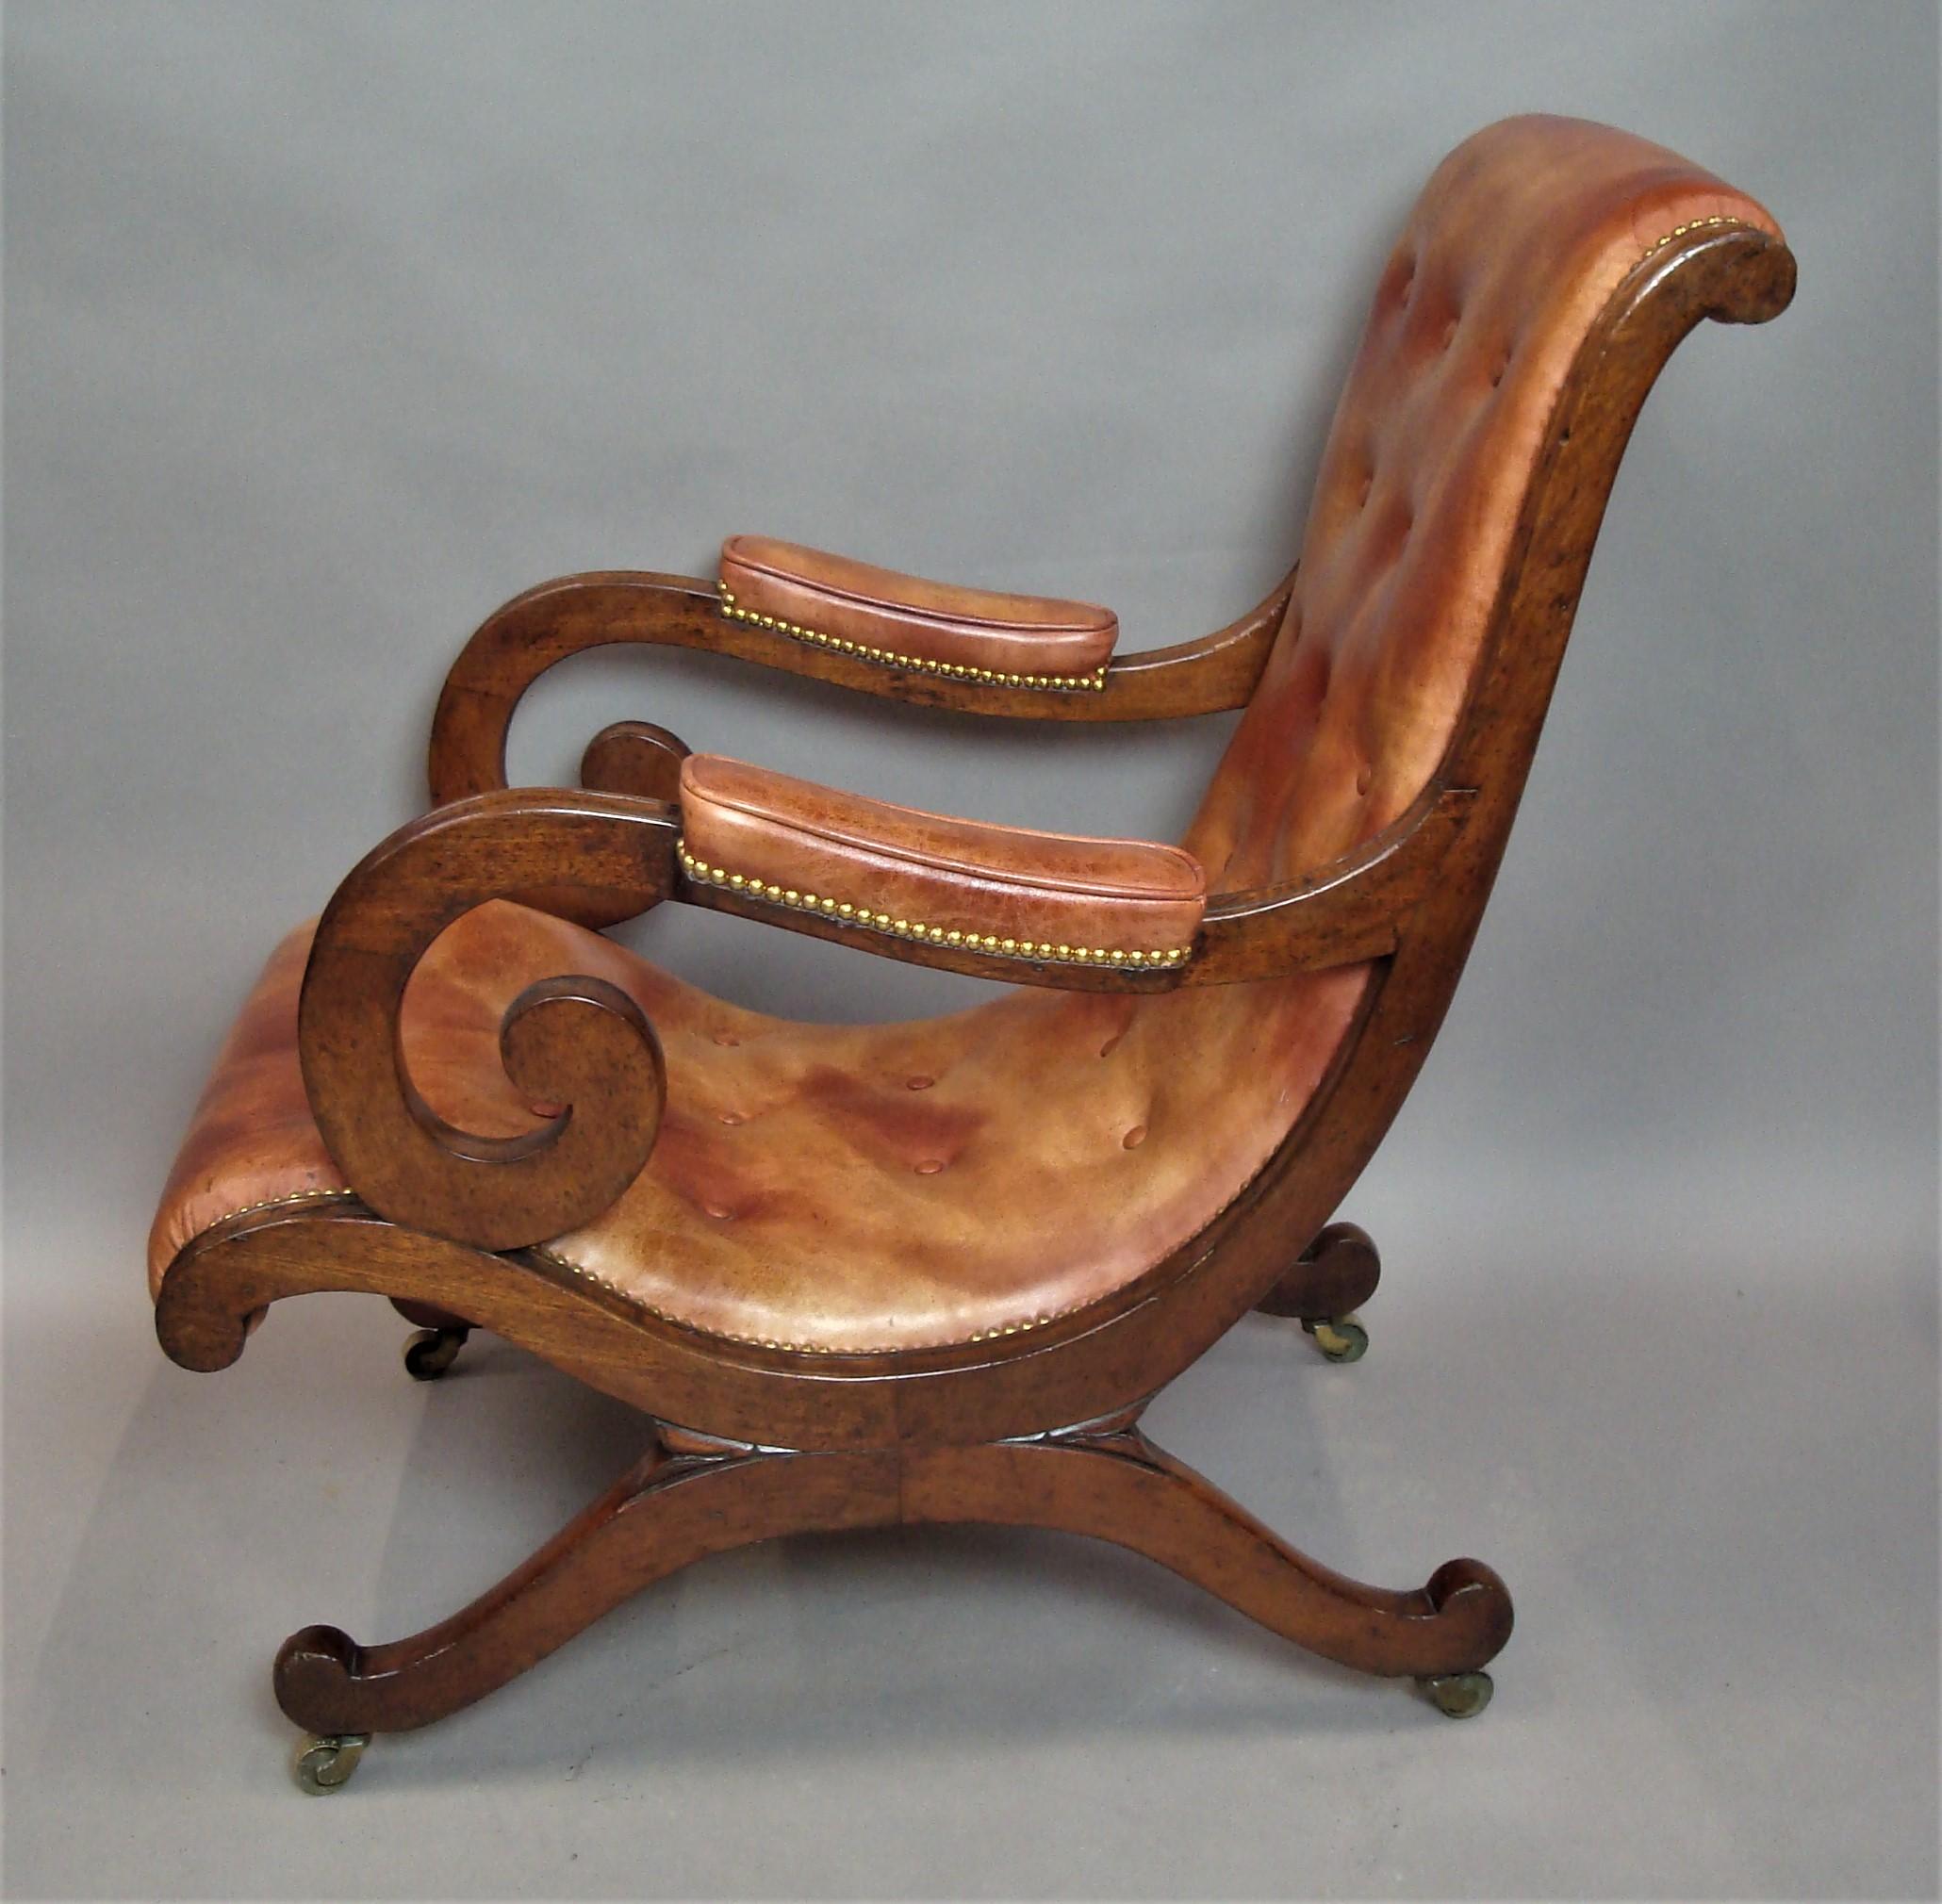 Regency Mahogany and Leather Library Chair In Good Condition For Sale In Moreton-in-Marsh, Gloucestershire